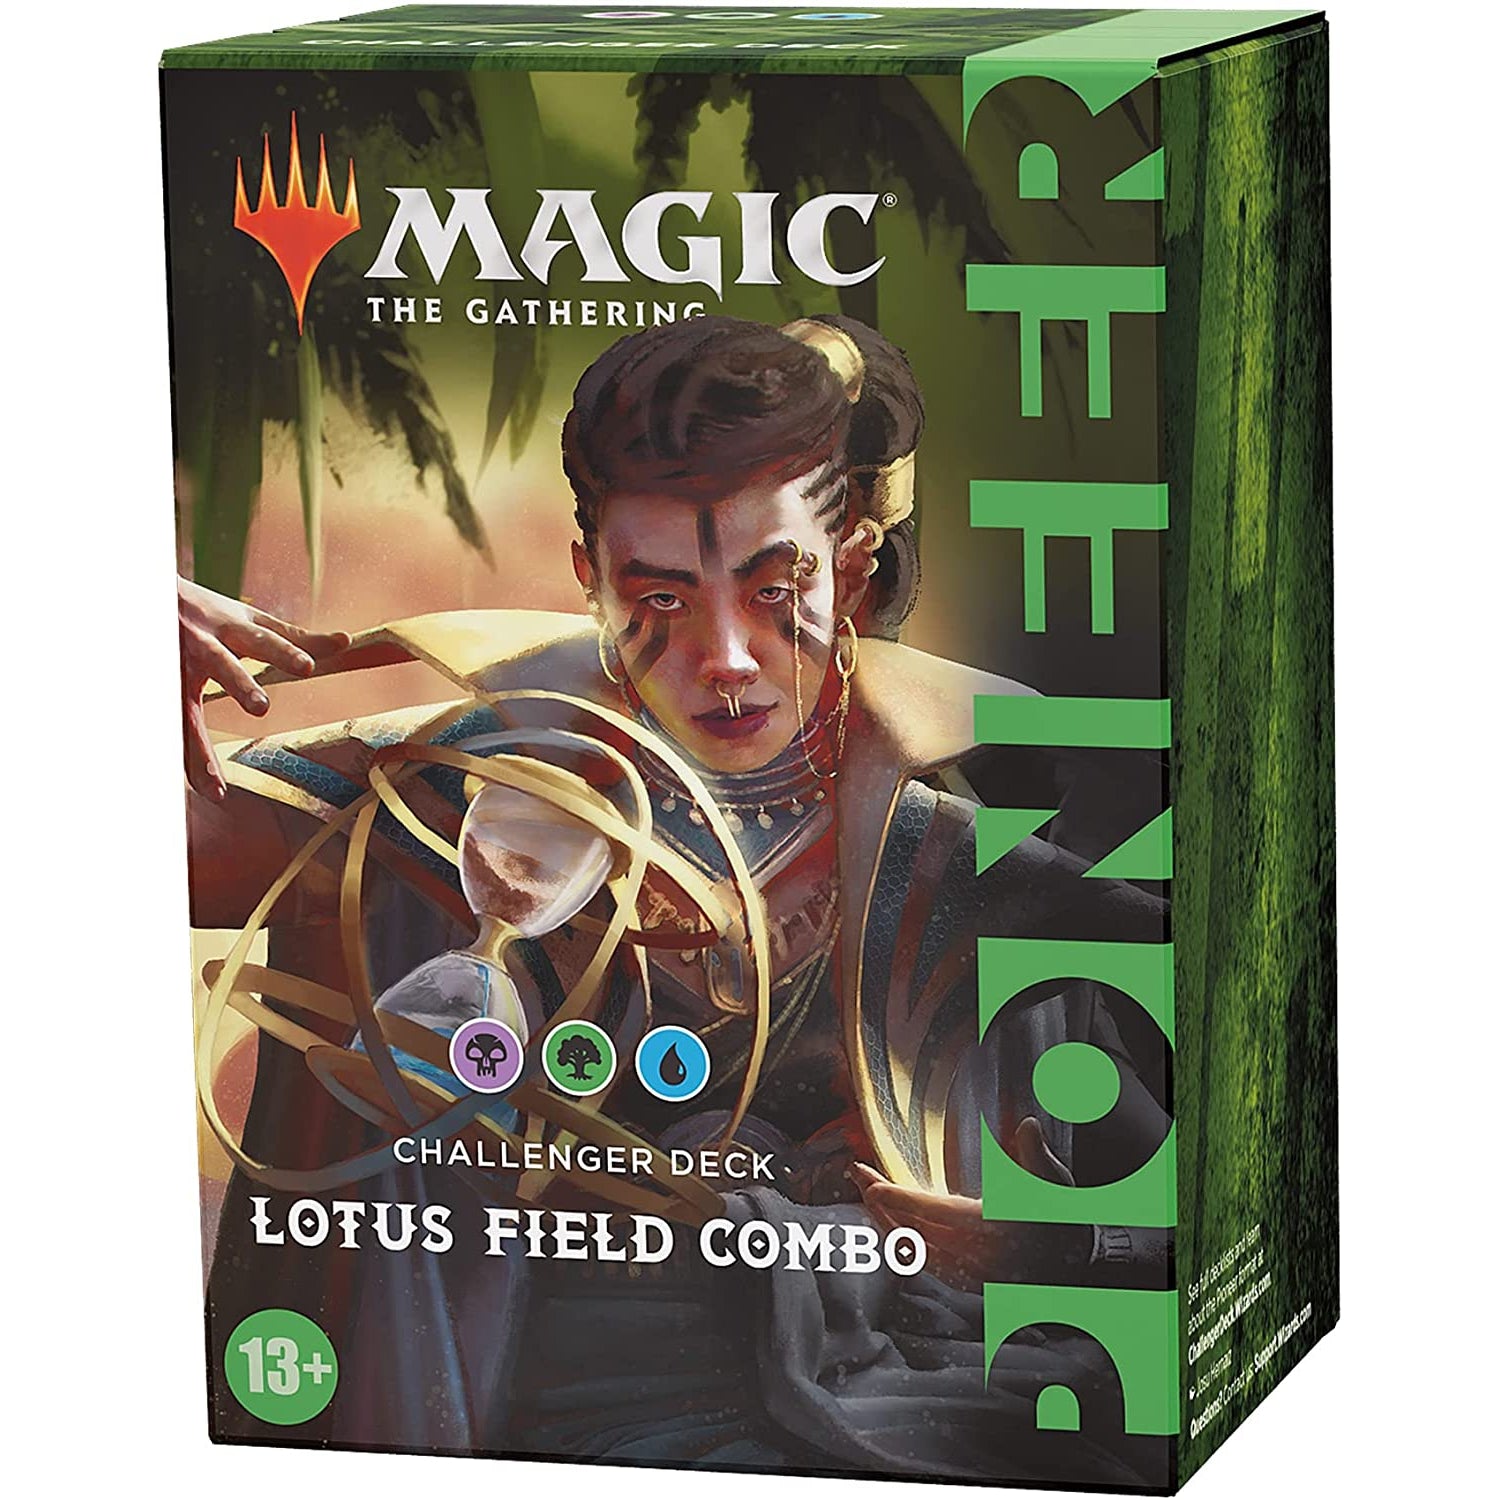 Magic: The Gathering Pioneer Challenger Deck - Lotus Field Combo